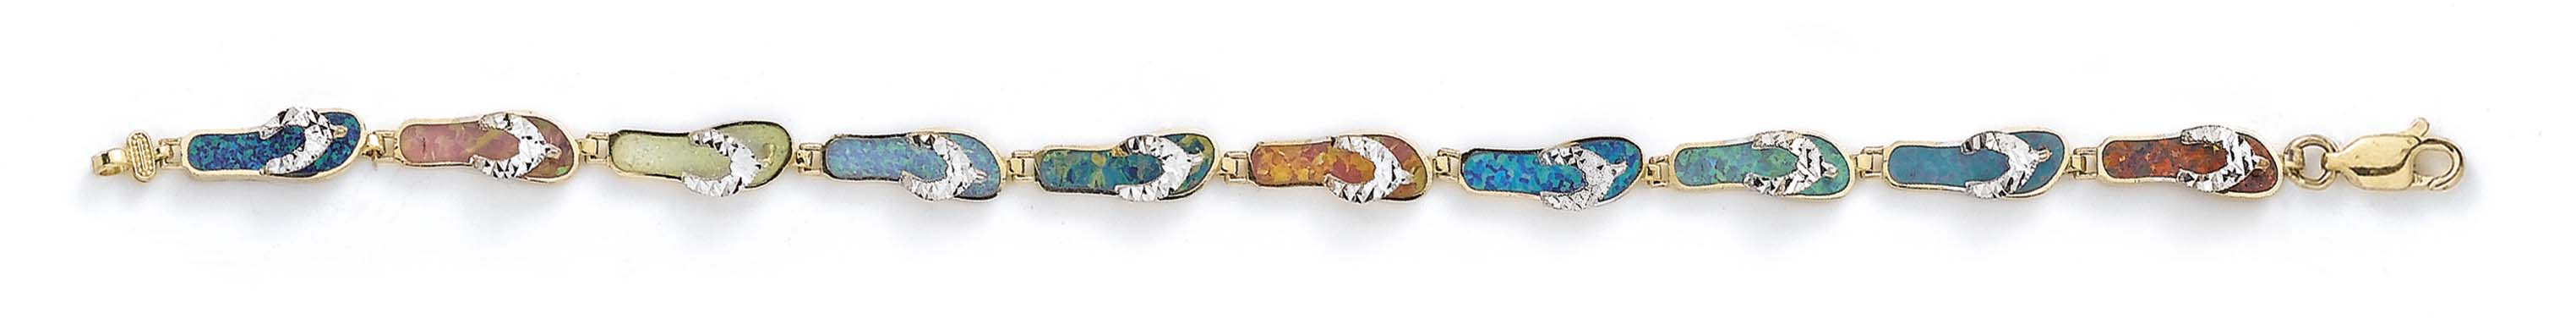 
14k Yellow Gold Small Simulated Opal Sparkle-Cut Flip-Flop Bracelet - 7.25 Inch
